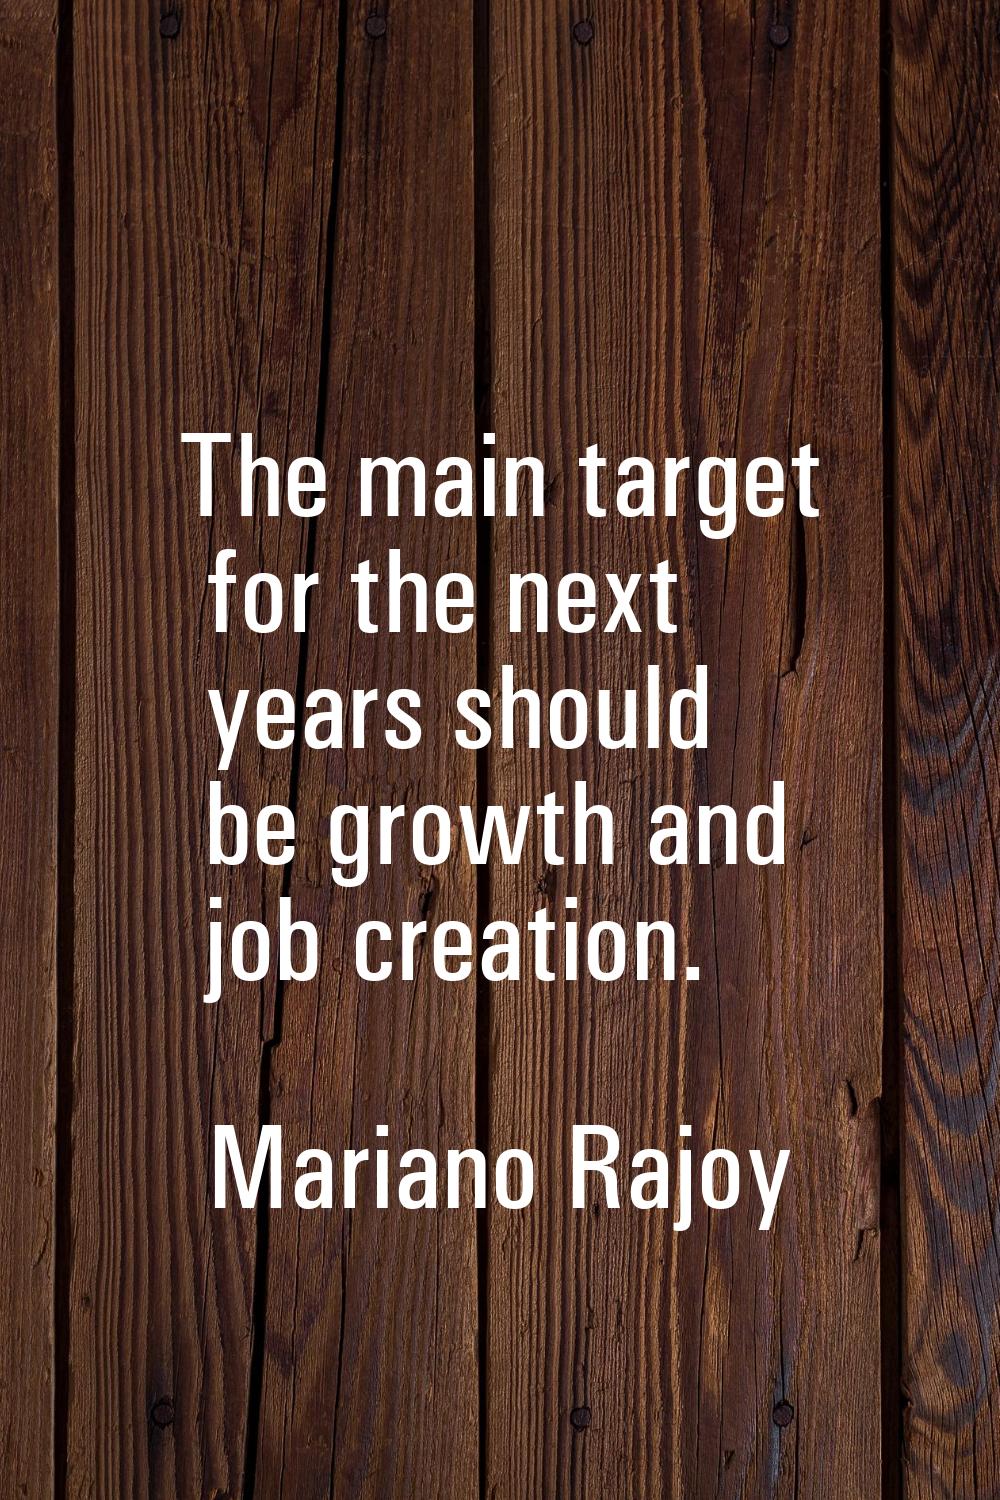 The main target for the next years should be growth and job creation.